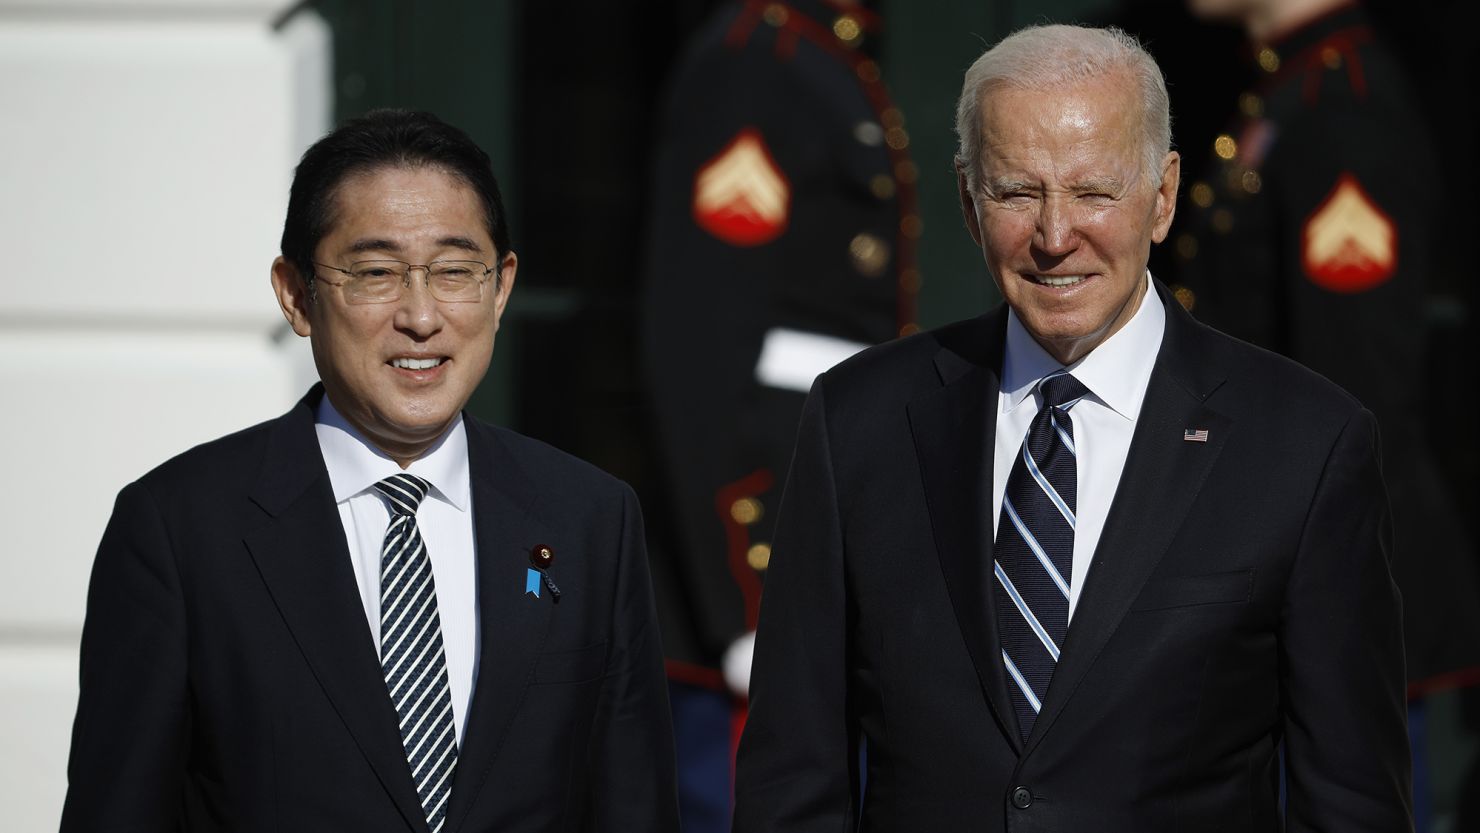 U.S. President Joe Biden poses for photographs with Japanese Prime Minister Kishida Fumio after his arrival at the White House on January 13, 2023 in Washington, DC.